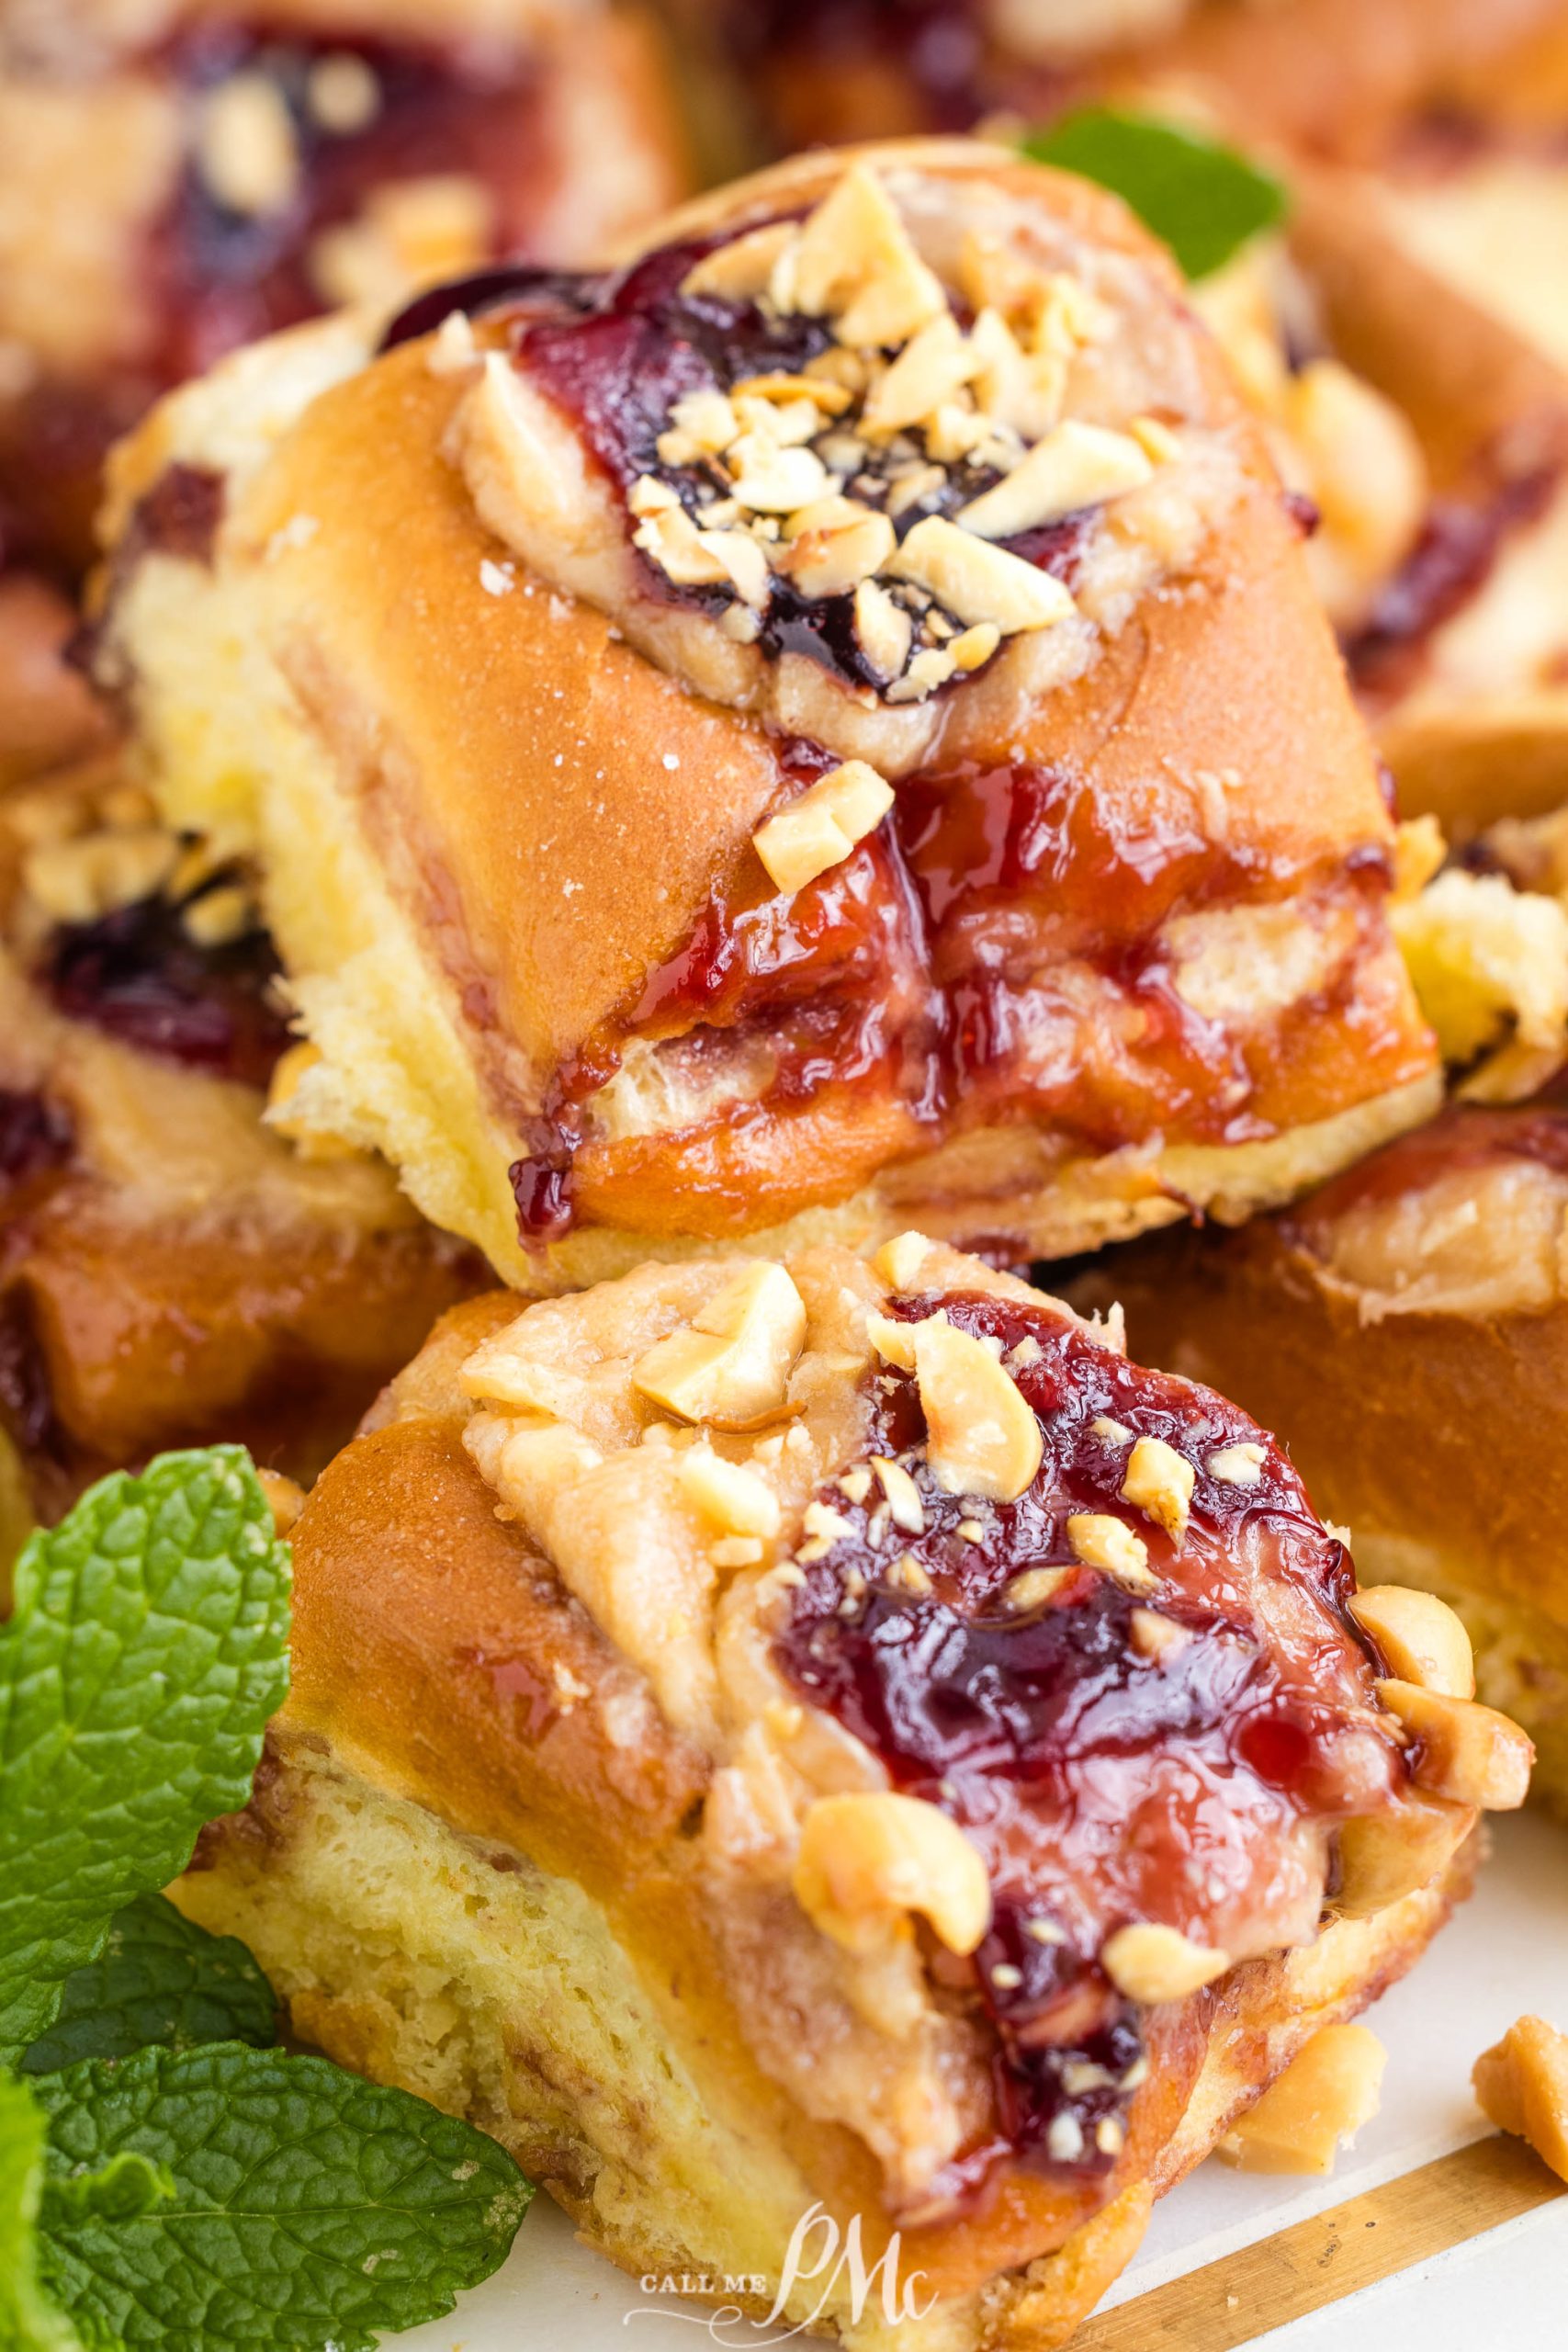 Peanut Butter and Jelly Hawaiian Roll Cheese Danish topped with crushed nuts, displayed with a garnish of fresh mint leaves.